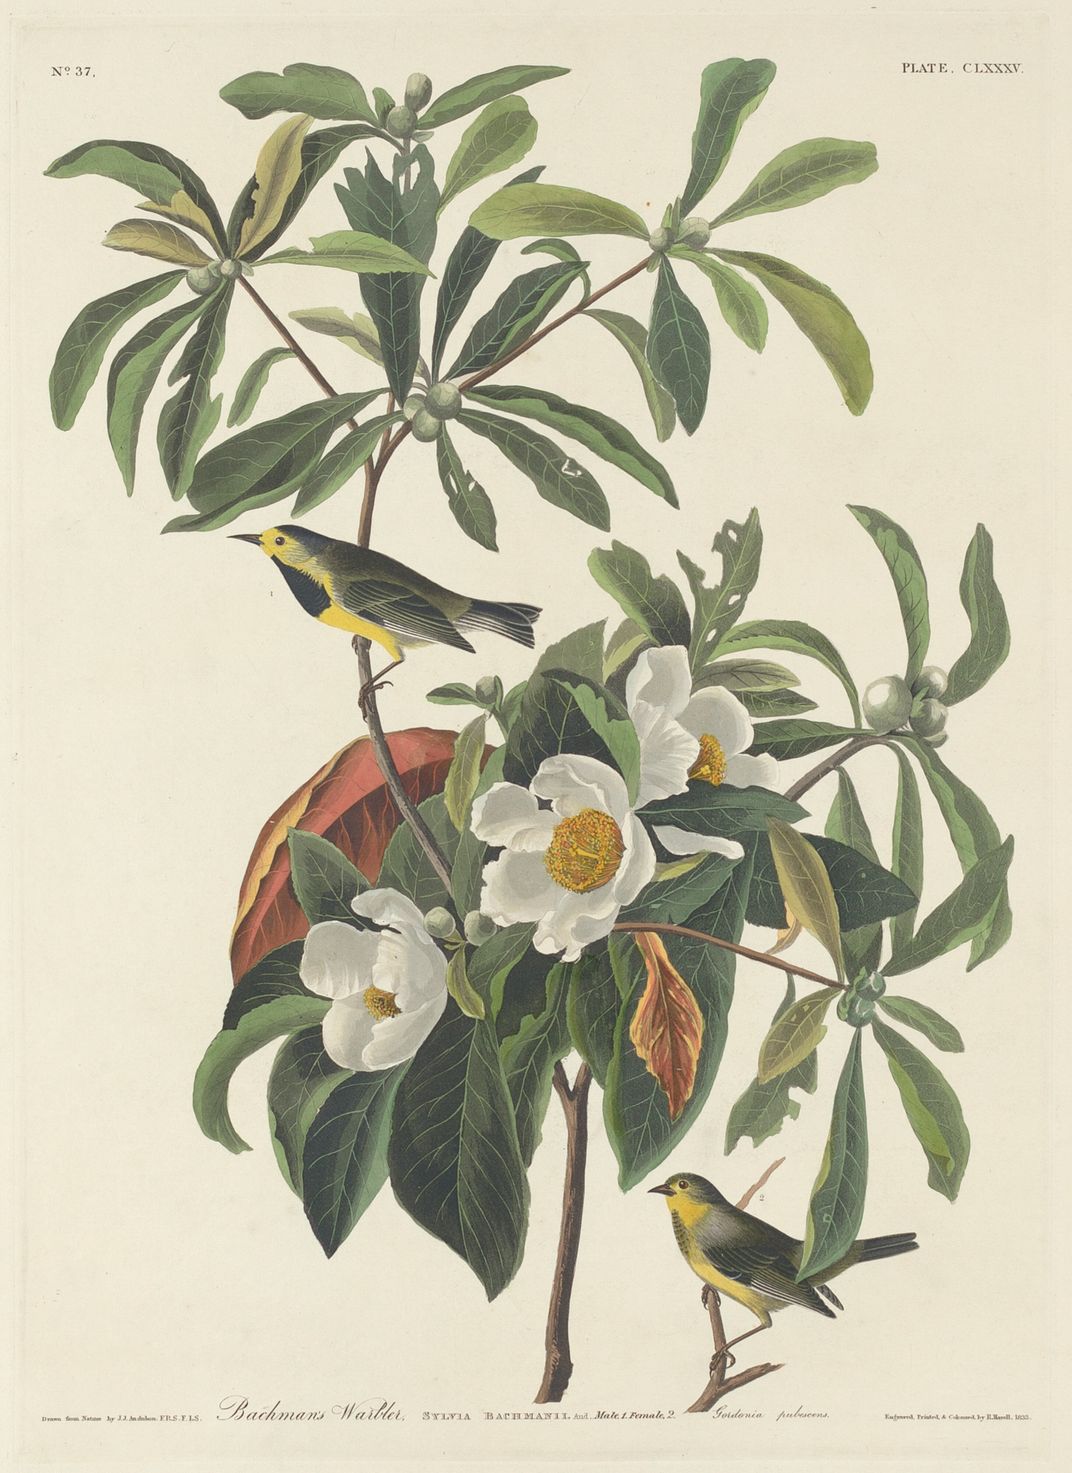 An illustration of bachmans warbler, a small bird with black upperparts, a black chin, and yellow underparts.